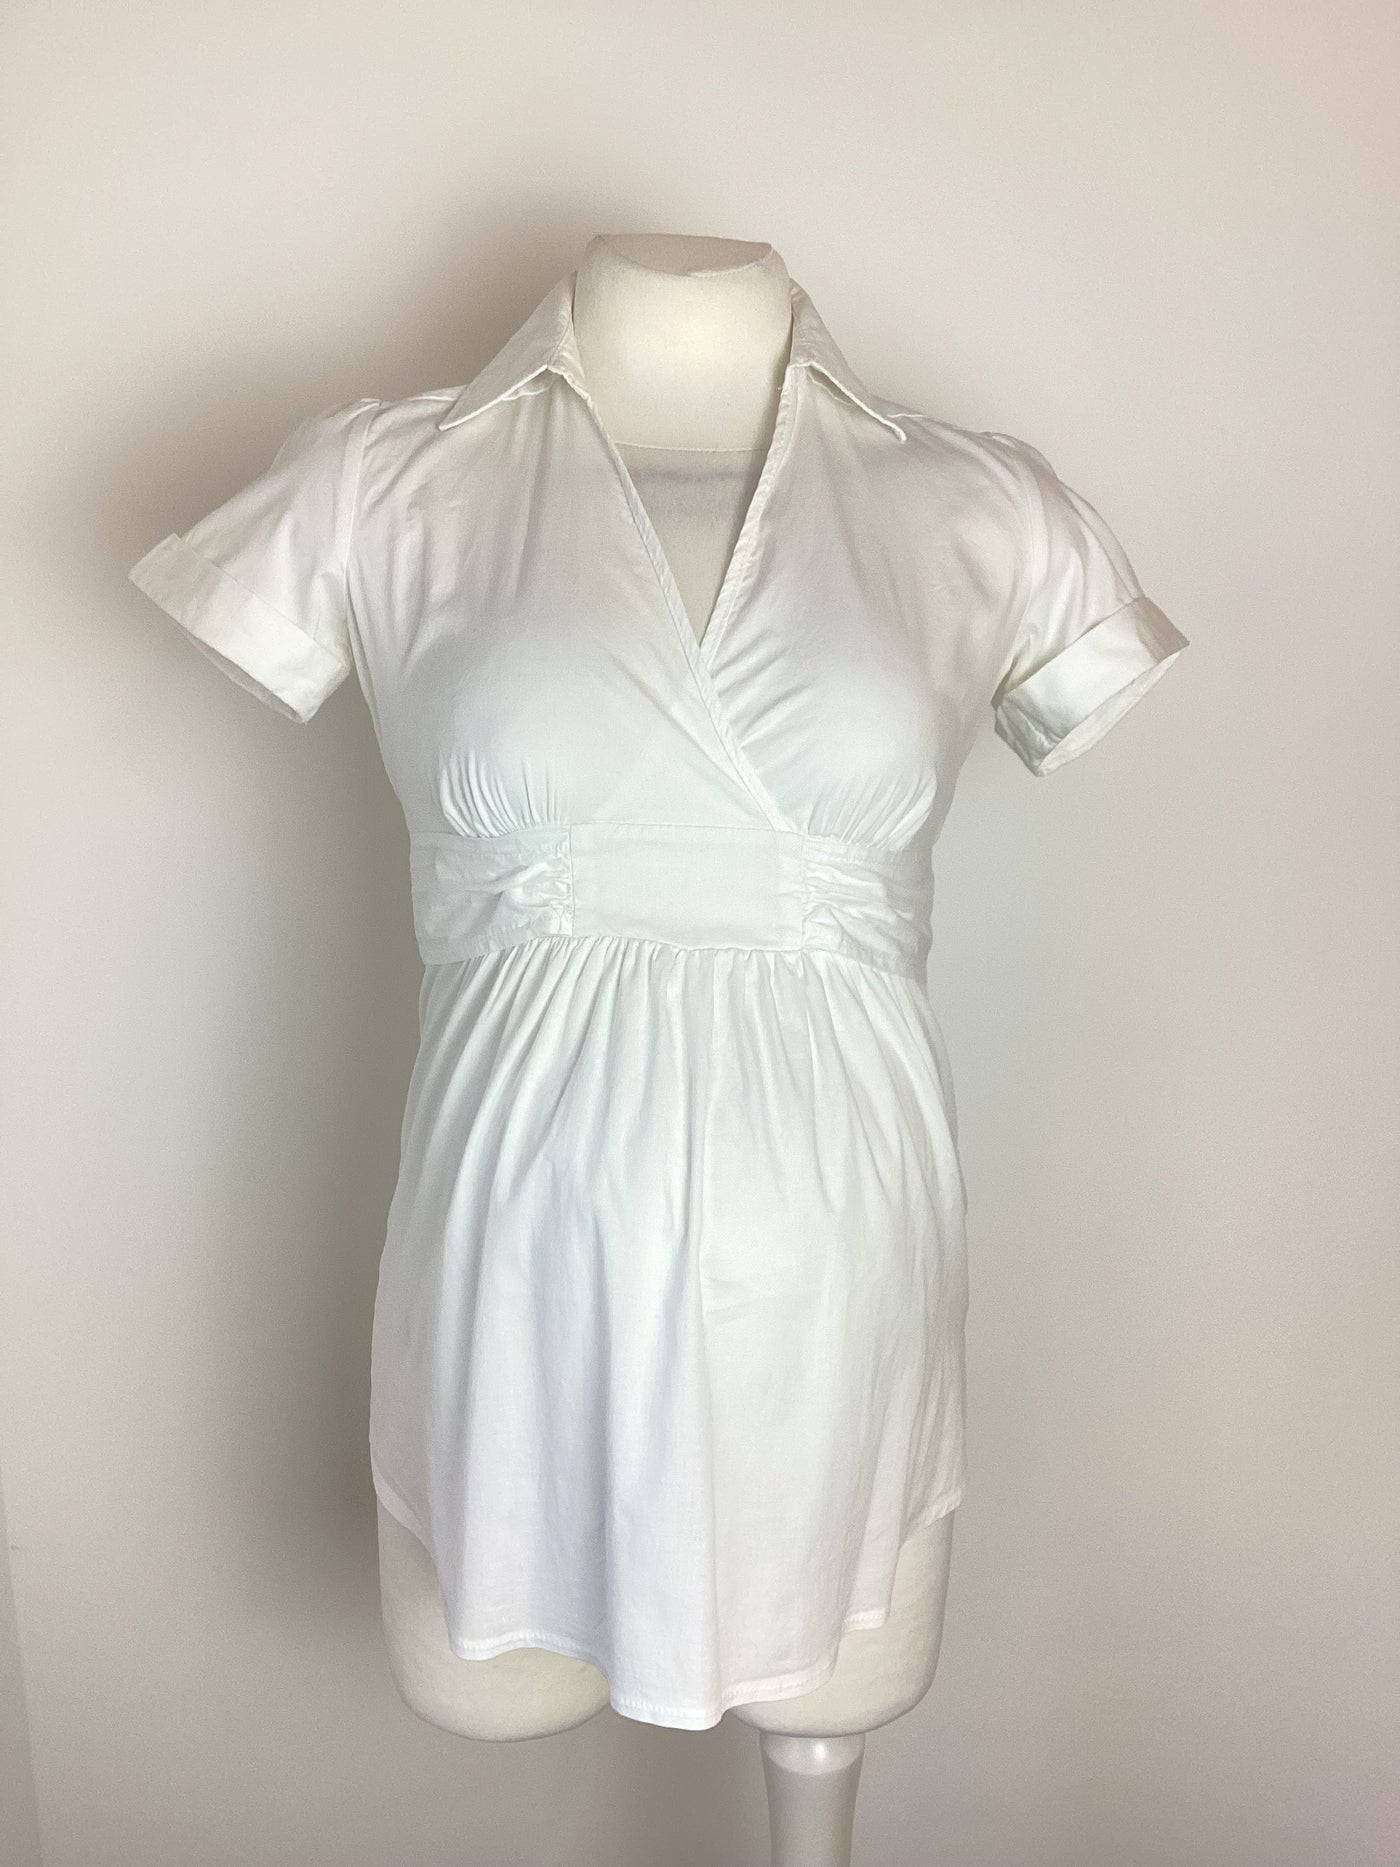 New Look Maternity white short sleeved, crossover front shirt with waist tie - Size 8